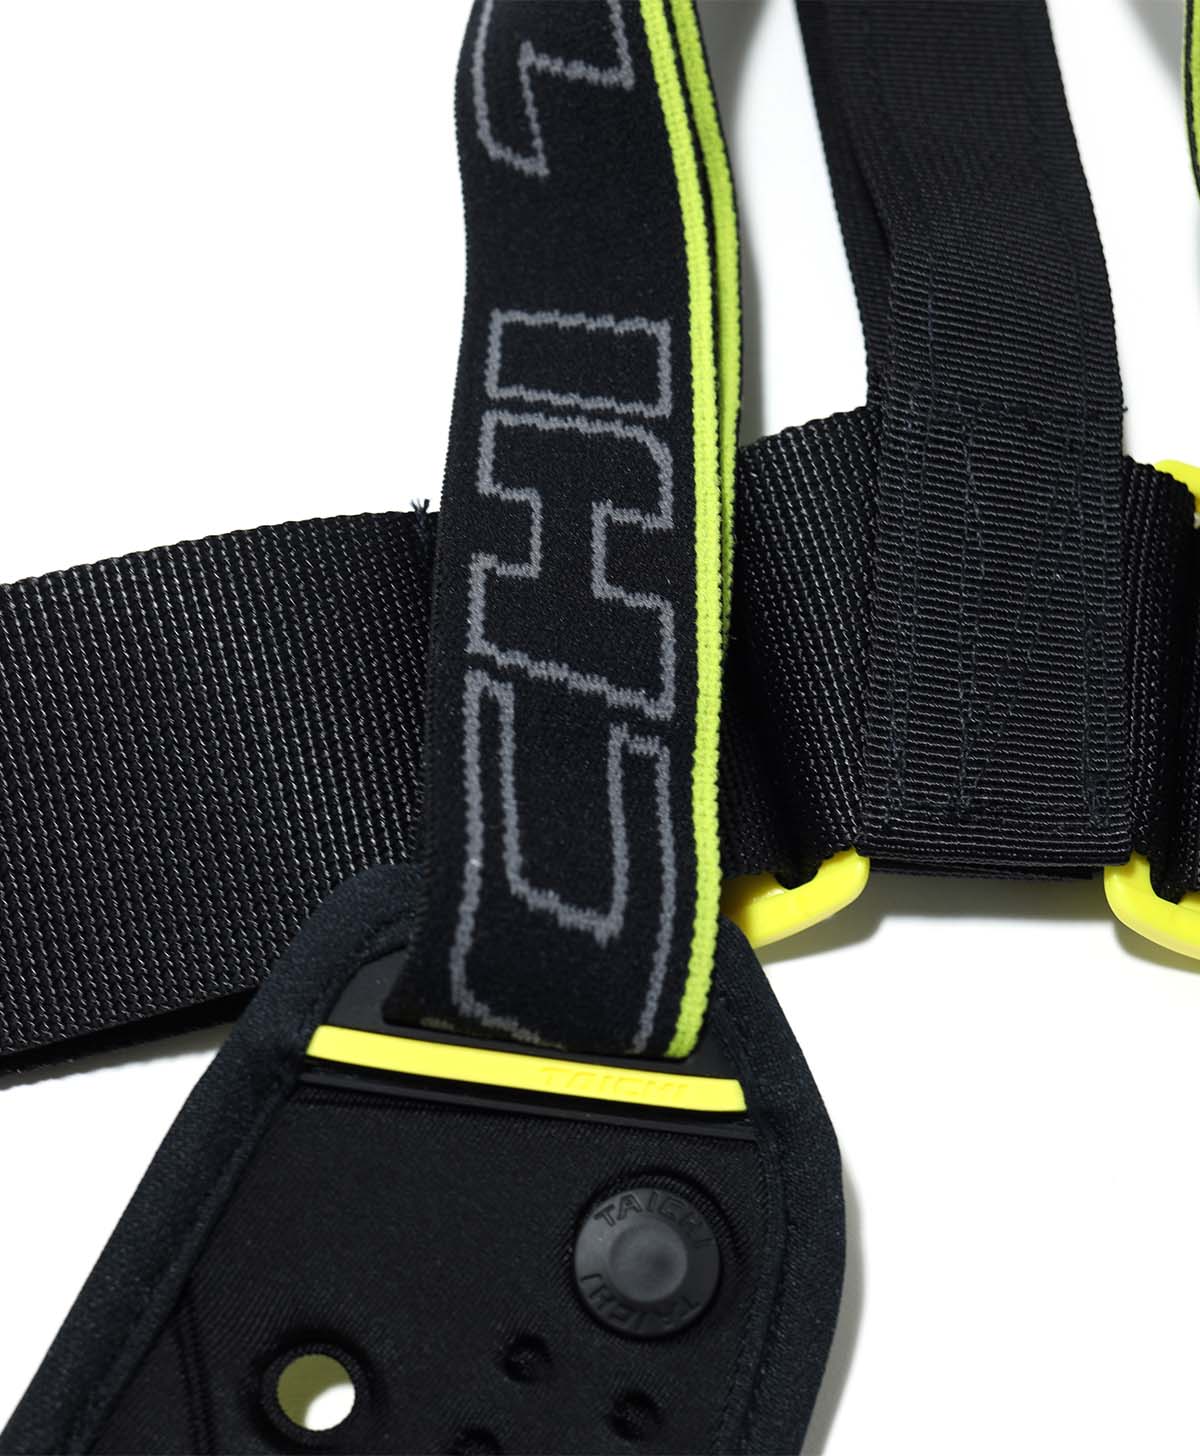 Fitting belt for CPS/black/yellow